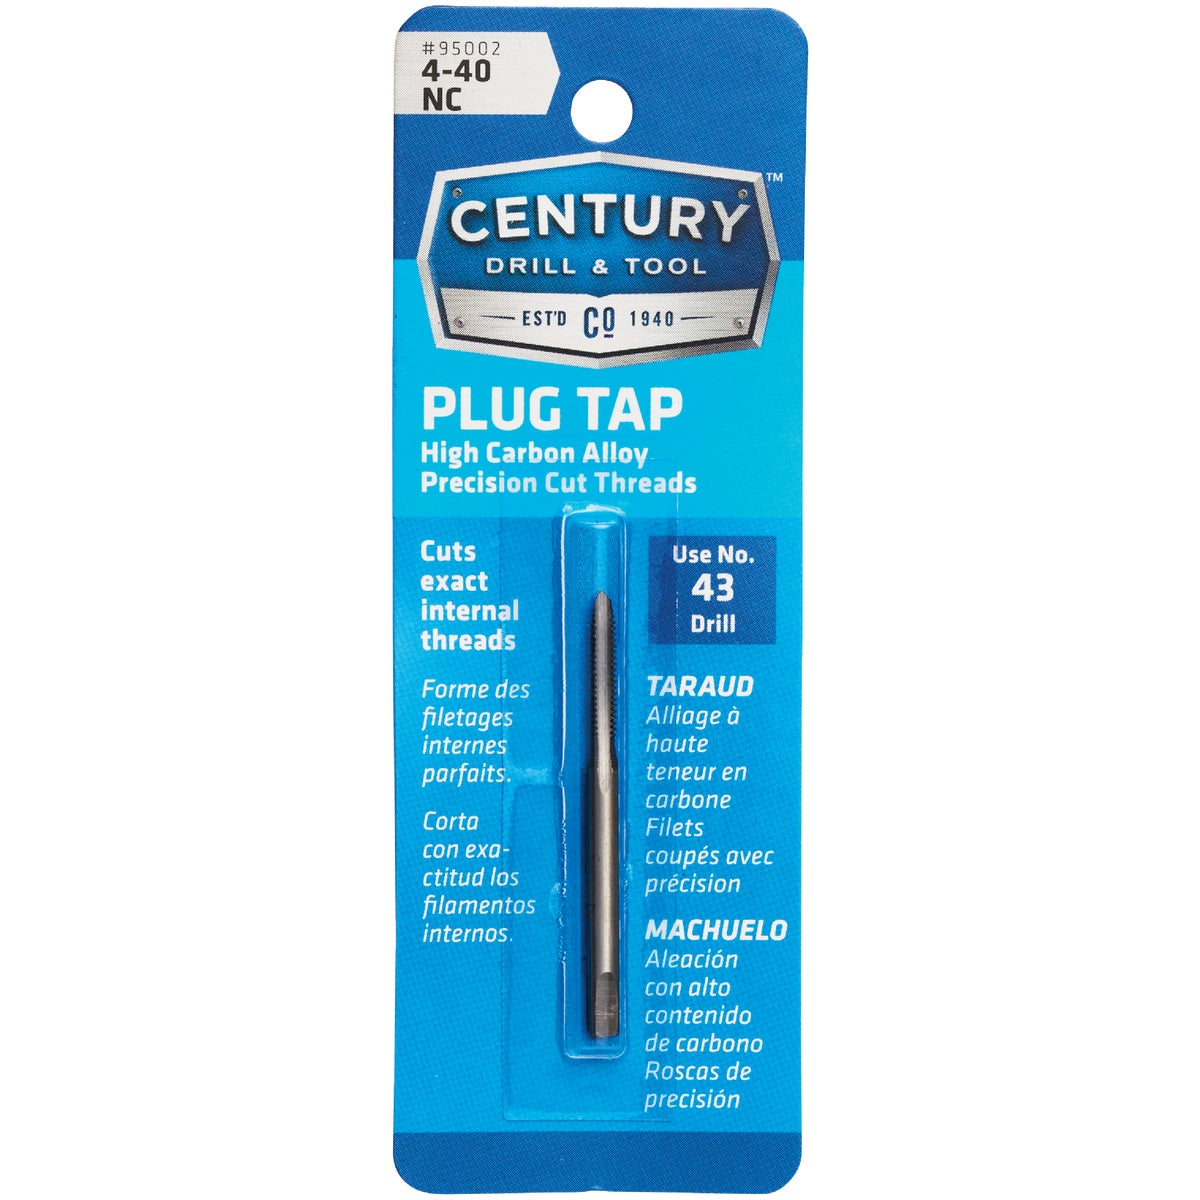 Century Drill & Tool 4-40 Carbon Steel National Coarse Tap-Plug